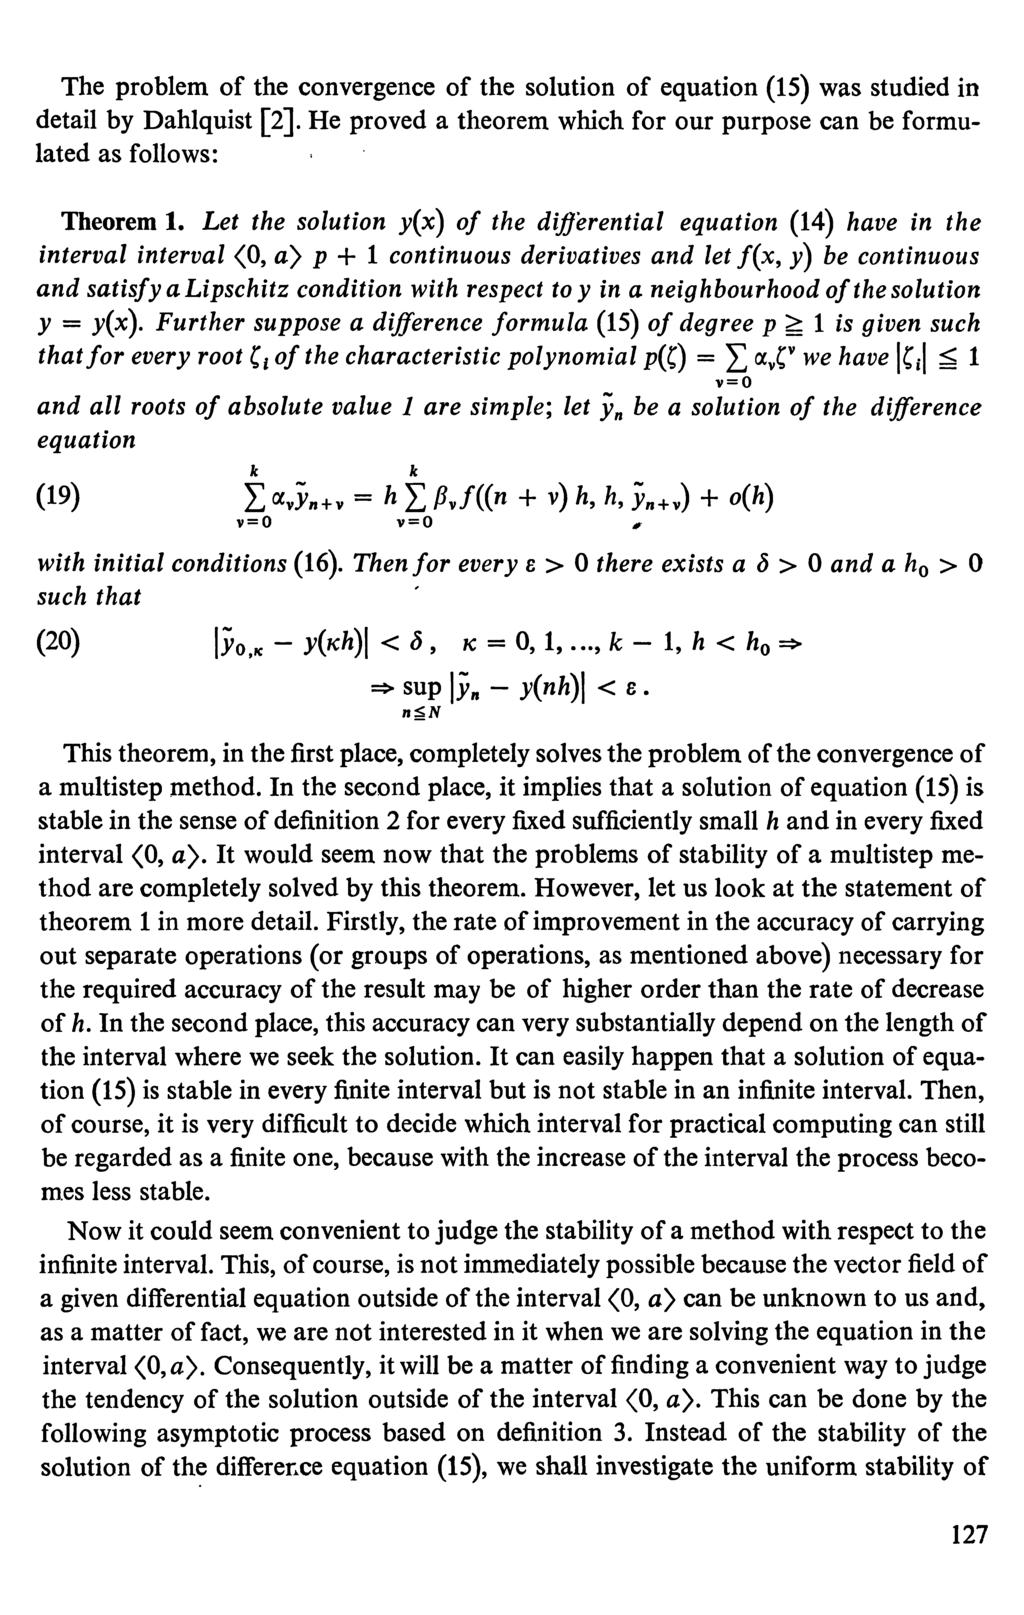 The problem of the convergence of the solution of equation (15) was studied in detail by Dahlquist [2]. He proved a theorem which for our purpose can be formulated as follows: Theorem 1.